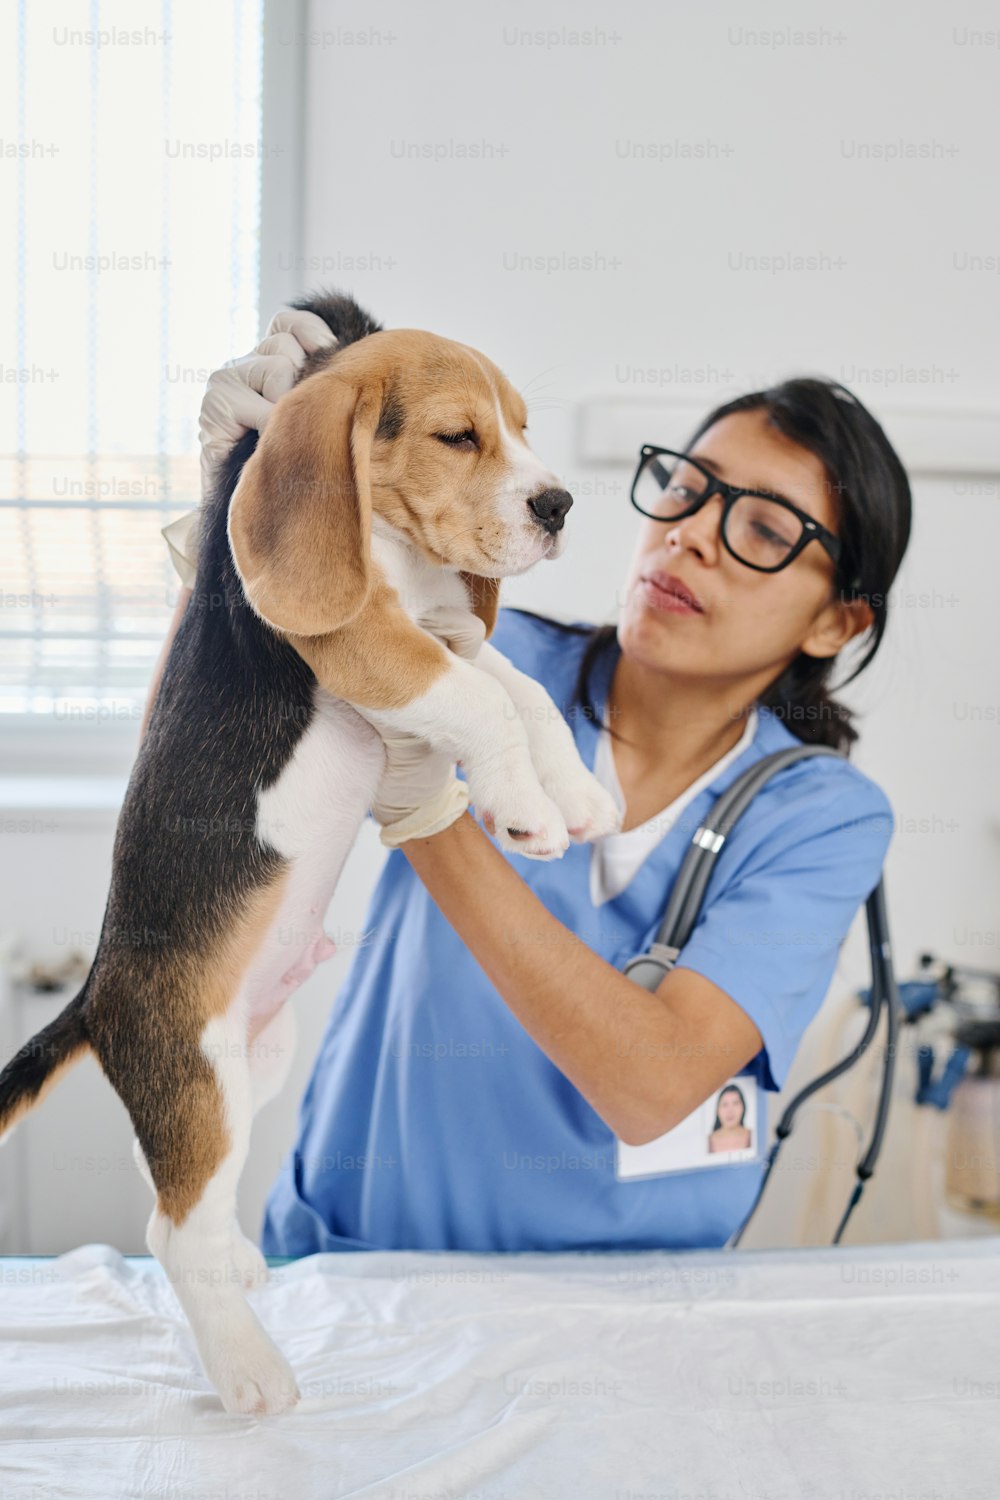 Professional veterinarian holding beagle puppy by scruff palpating its chest during medical check up